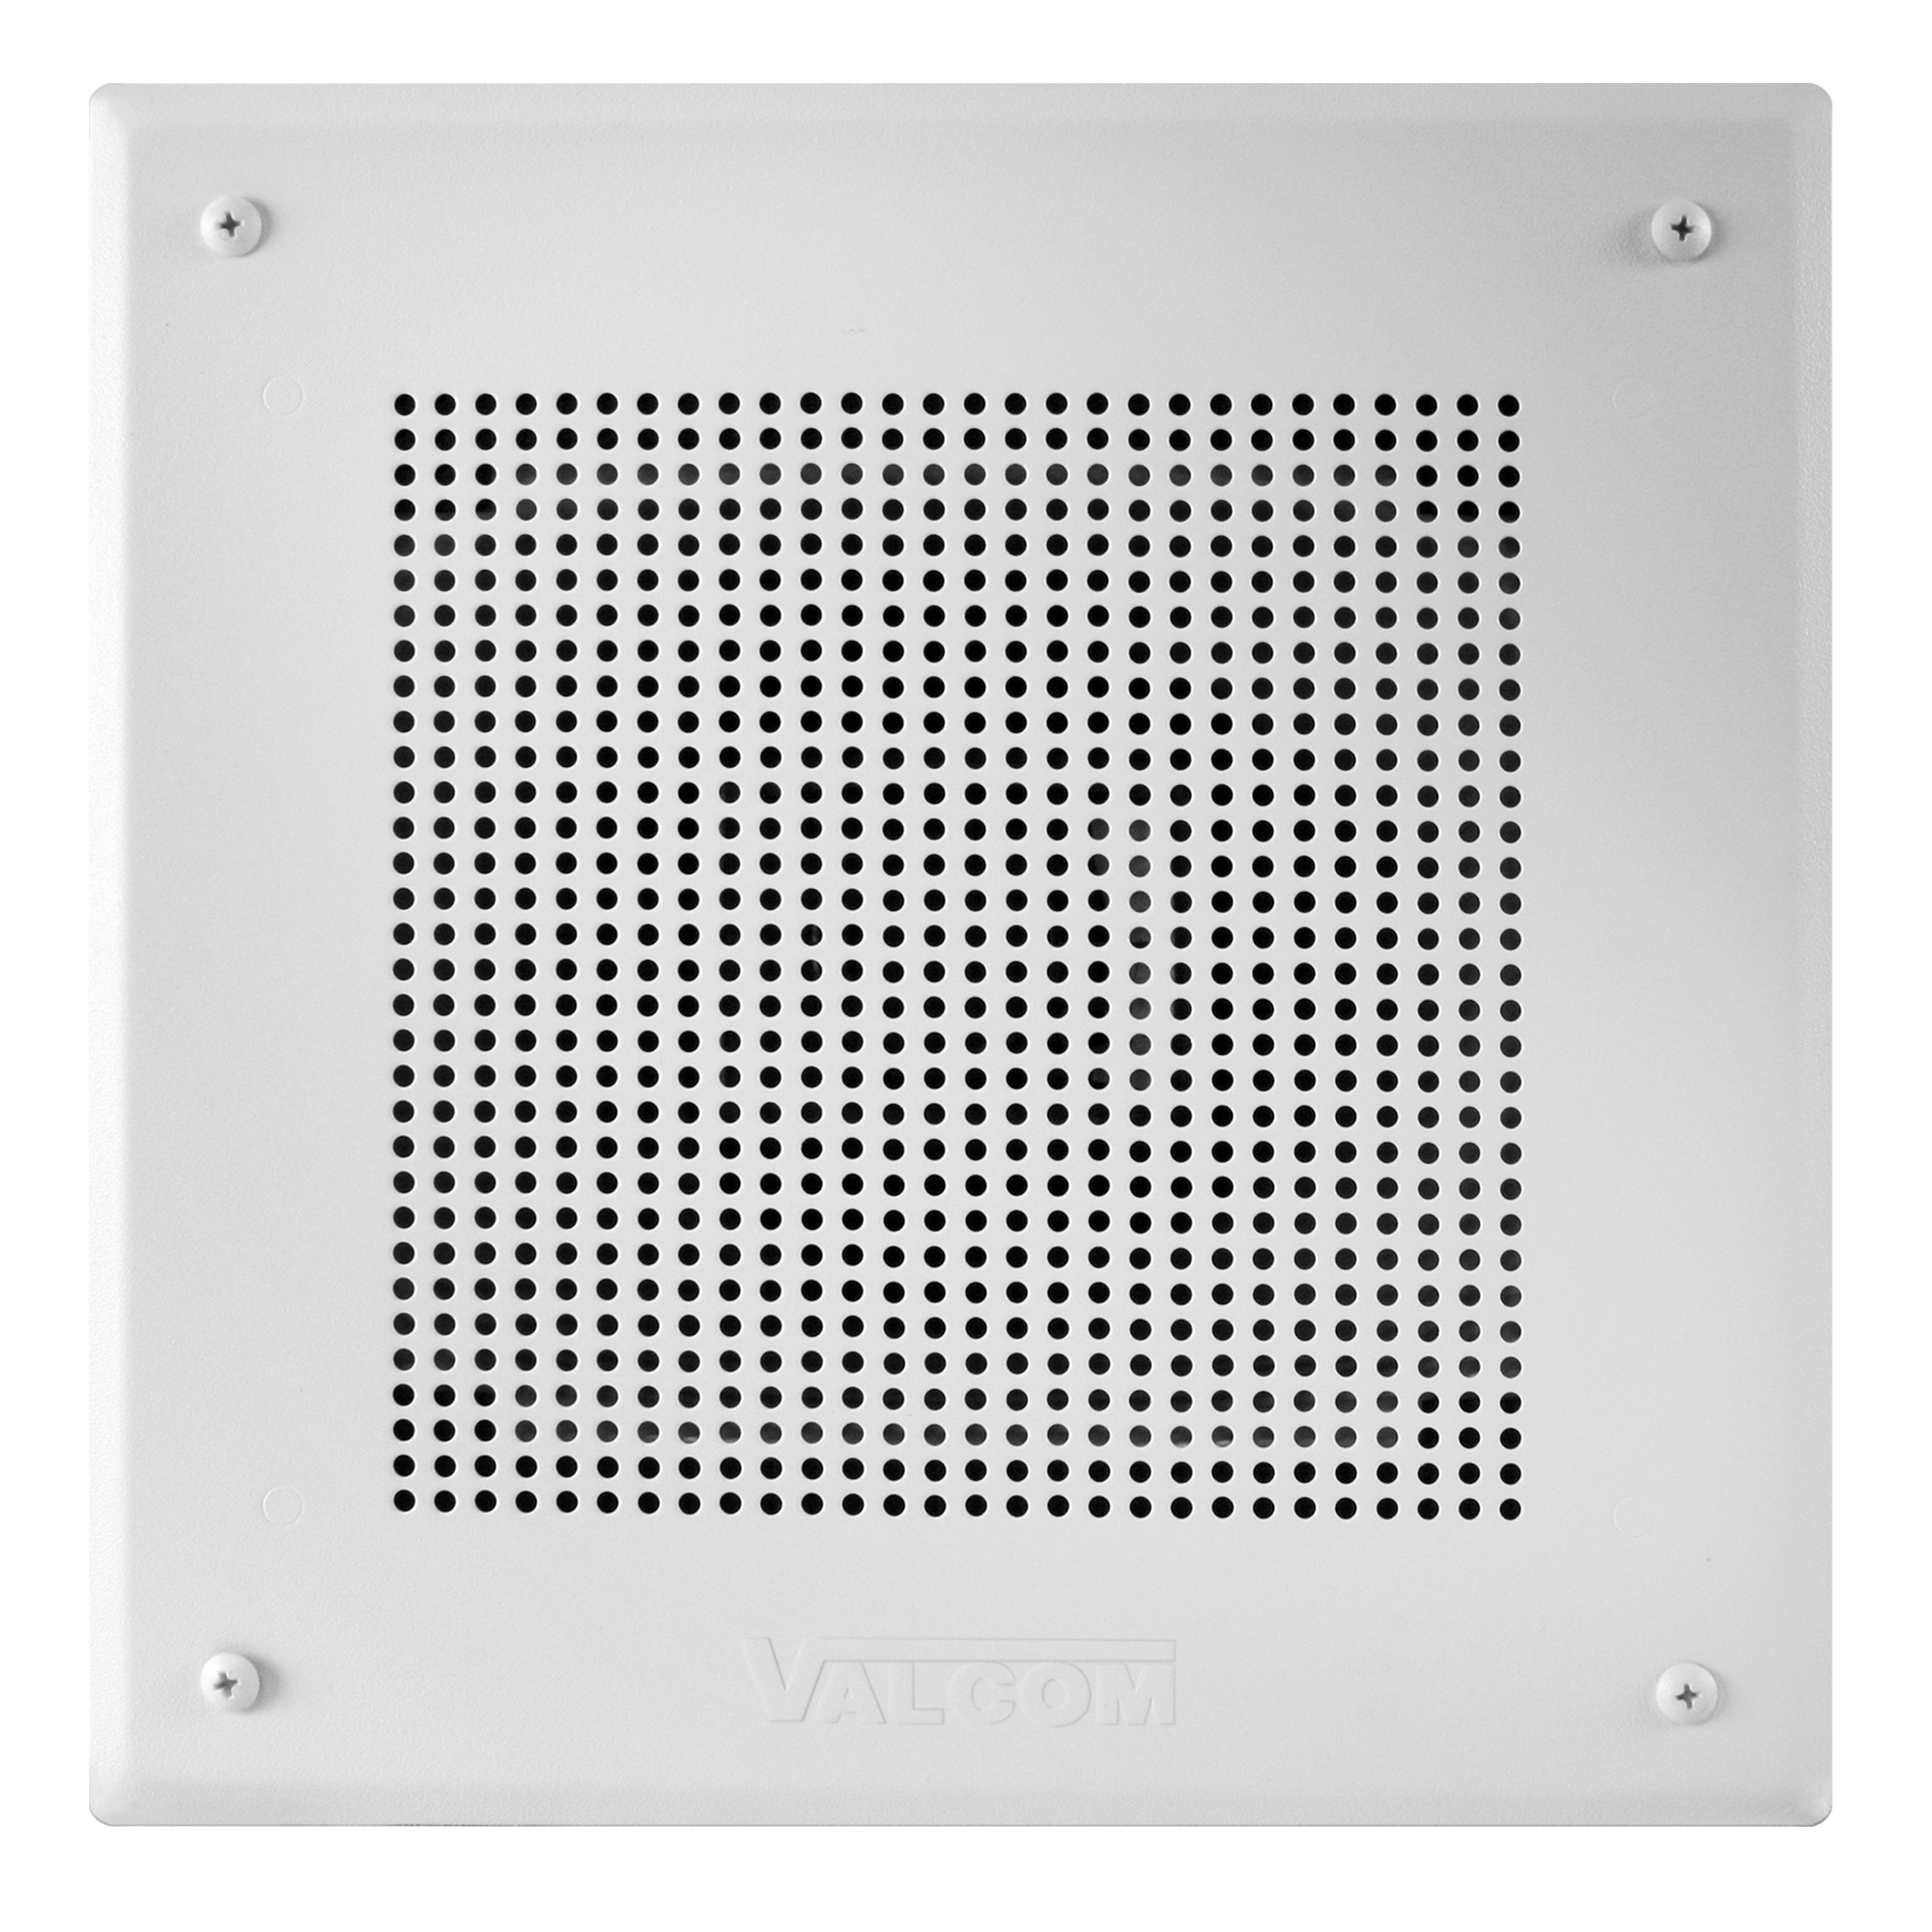 VIP-428A IP Square Ceiling Speaker, Square Hole Pattern, One-Way/Talkback Programmable, White